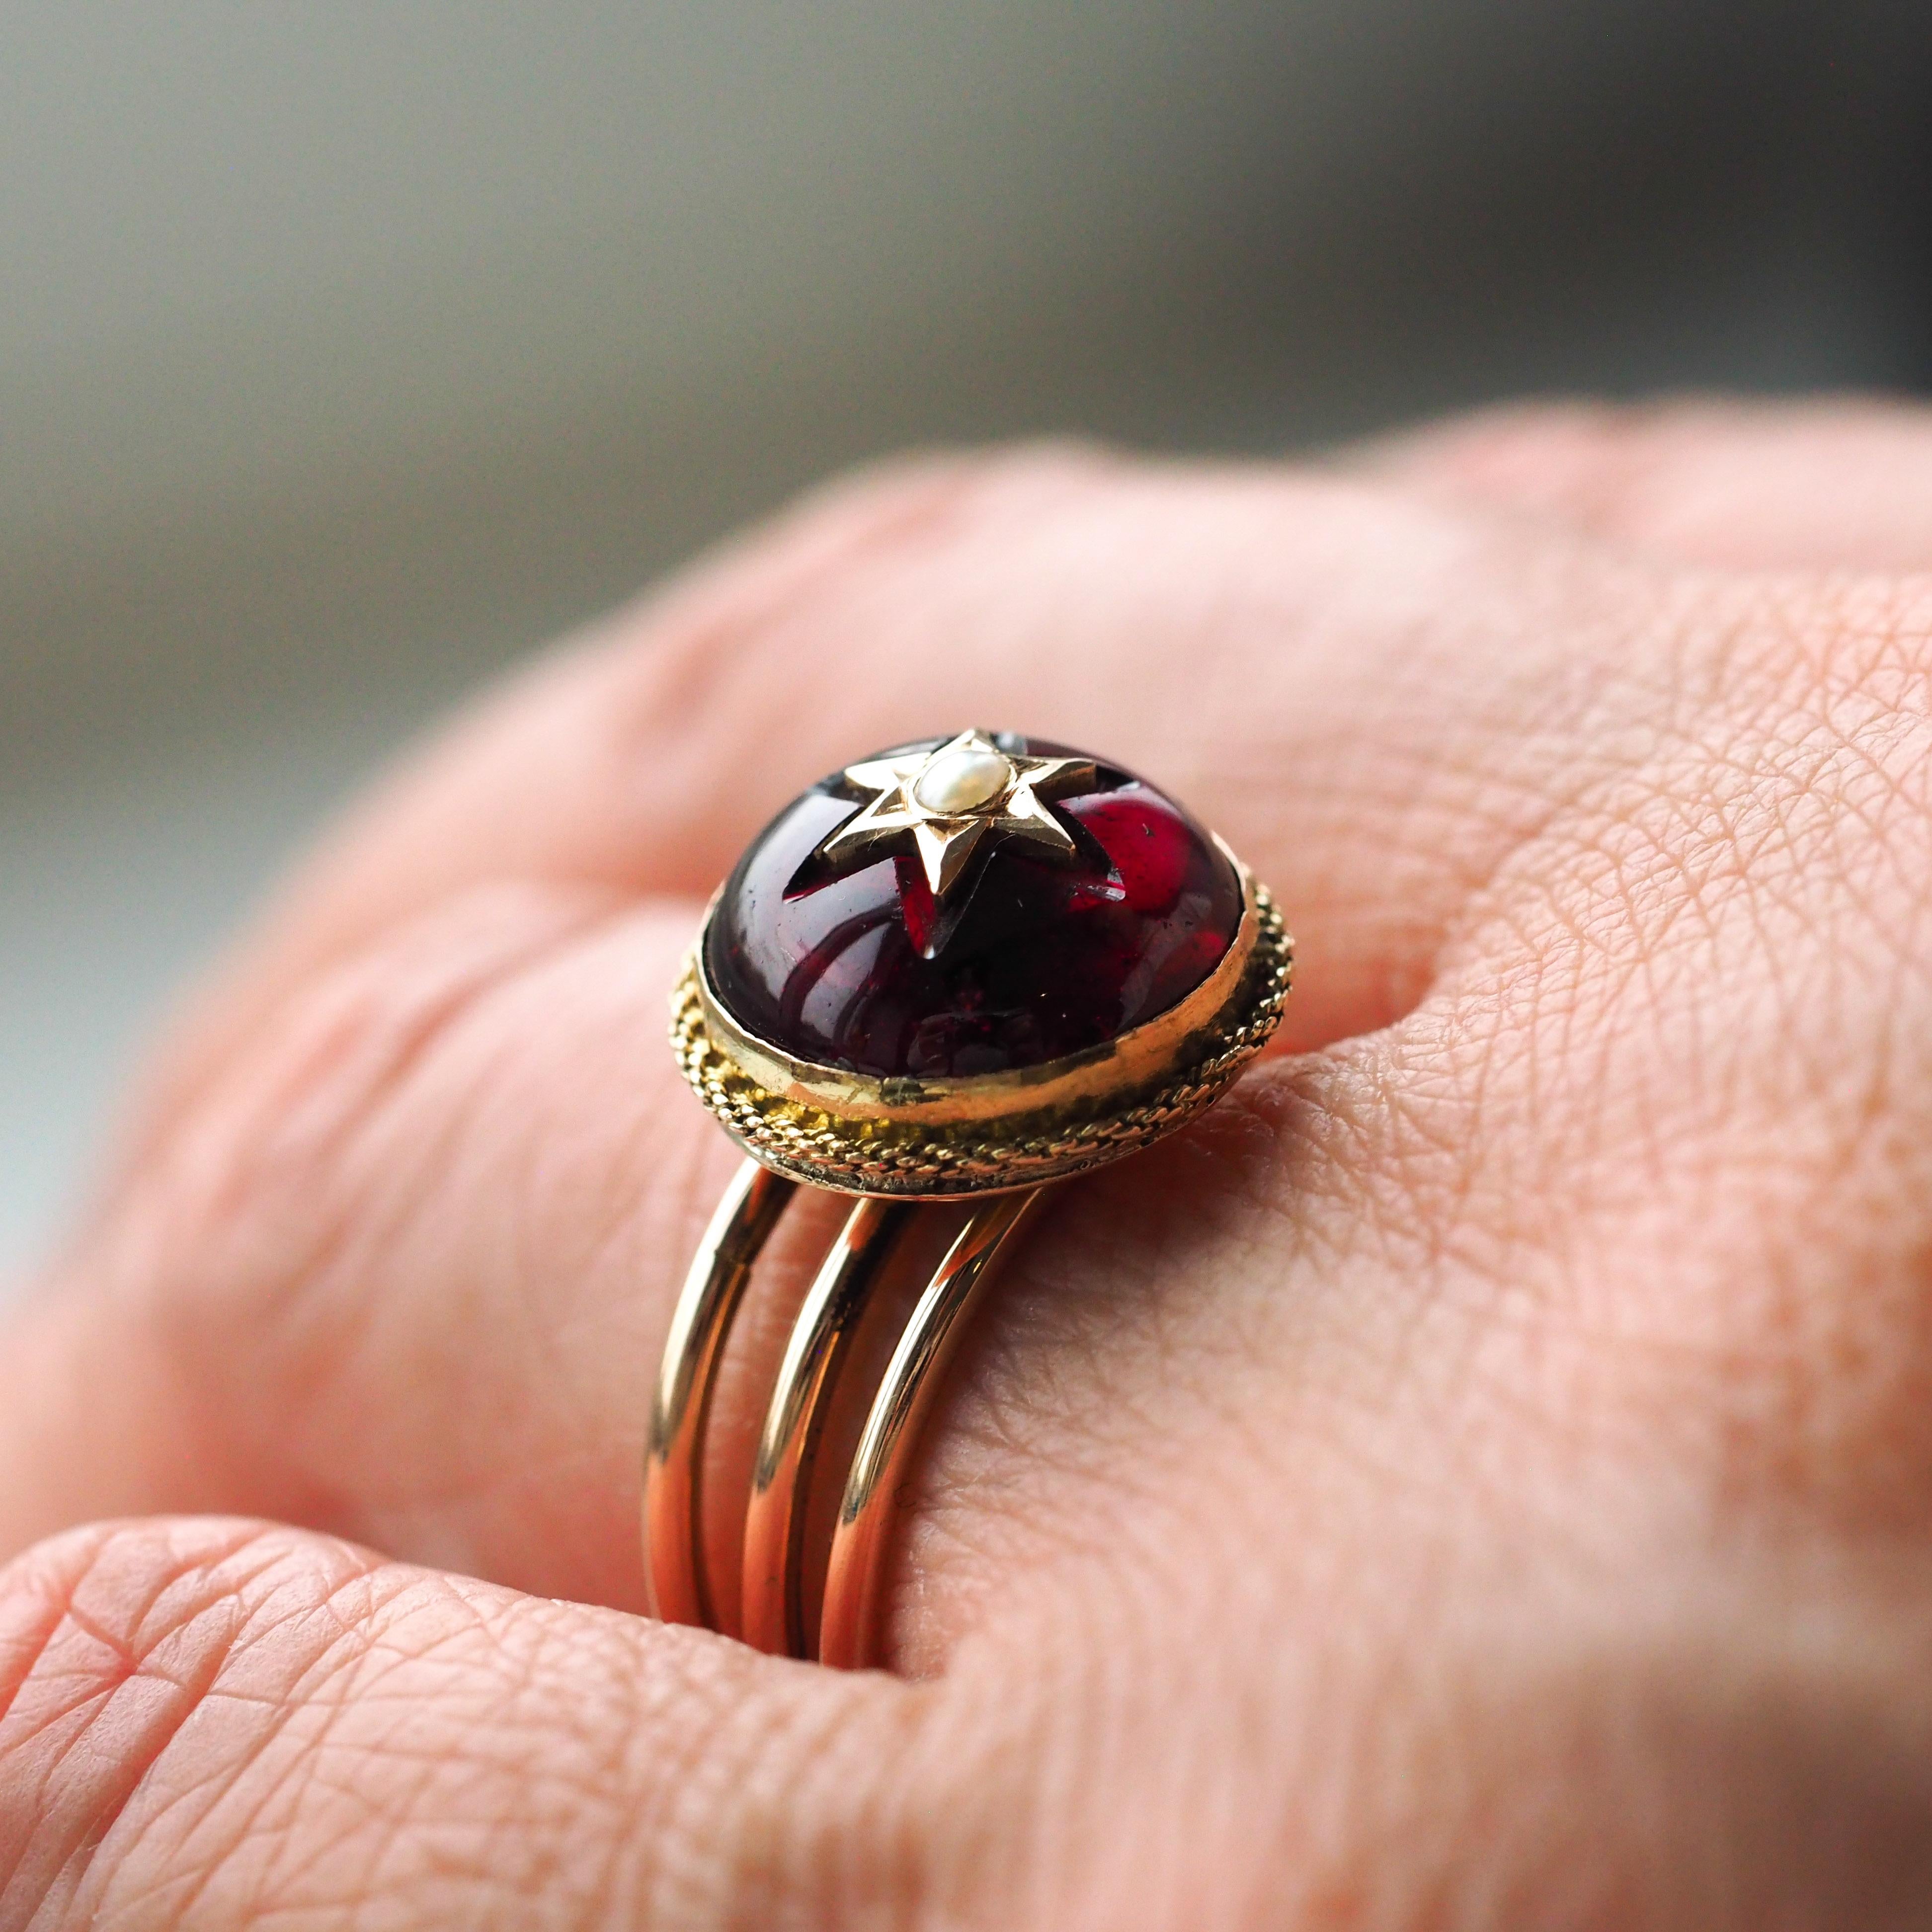 Antique Victorian 14K Gold Garnet Star Cabochon Ring with Seed Pearl - c.1880 For Sale 8